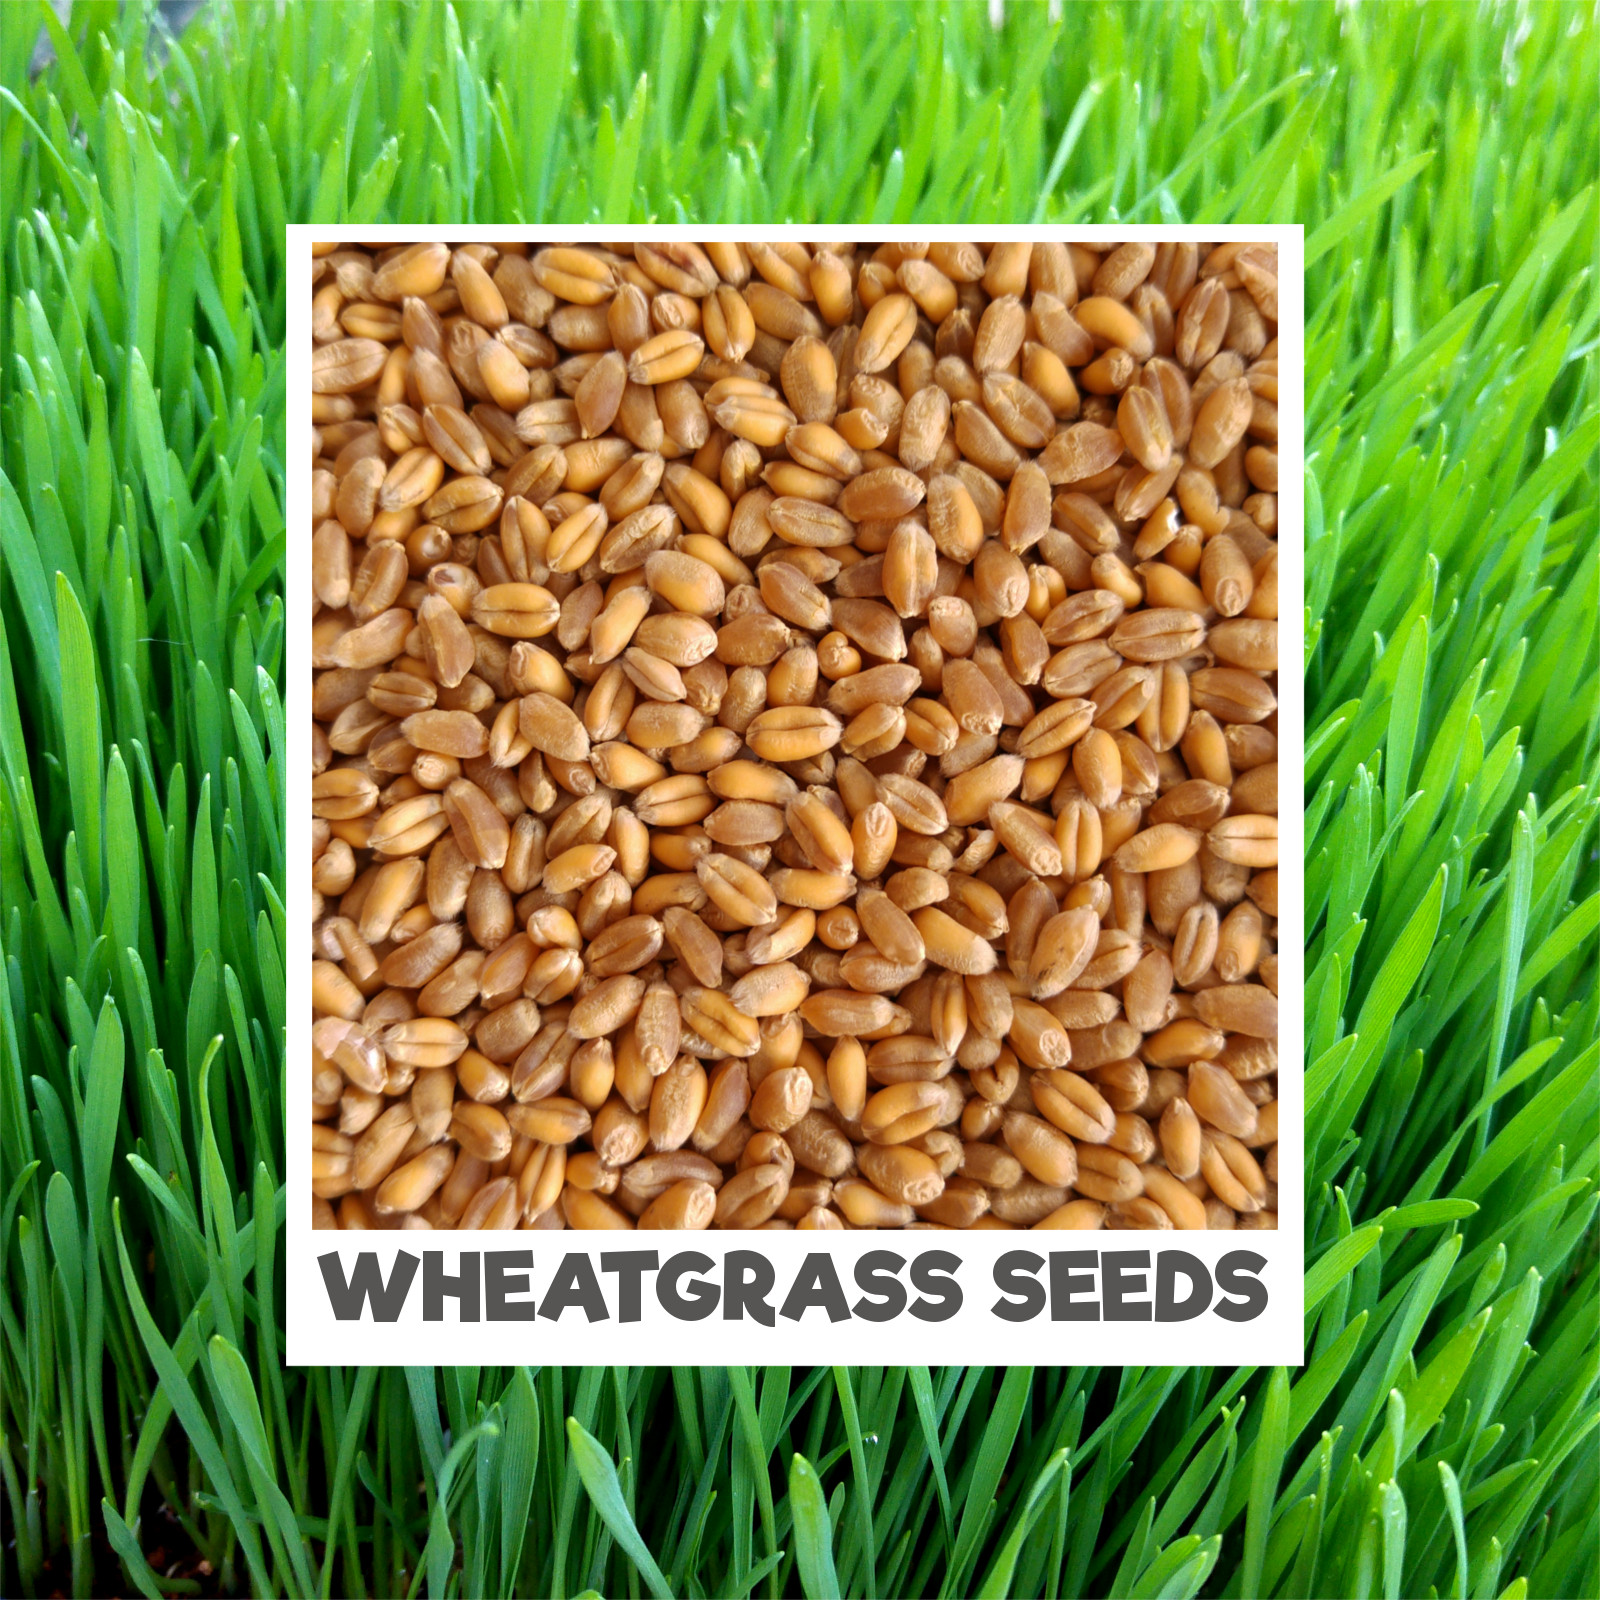 8 Ounces- 100% Organic Non GMO Hard Red Wheat Cat Grass Seeds Harvested in The US Easy to Grow. Organic Wheat Grass Seeds 